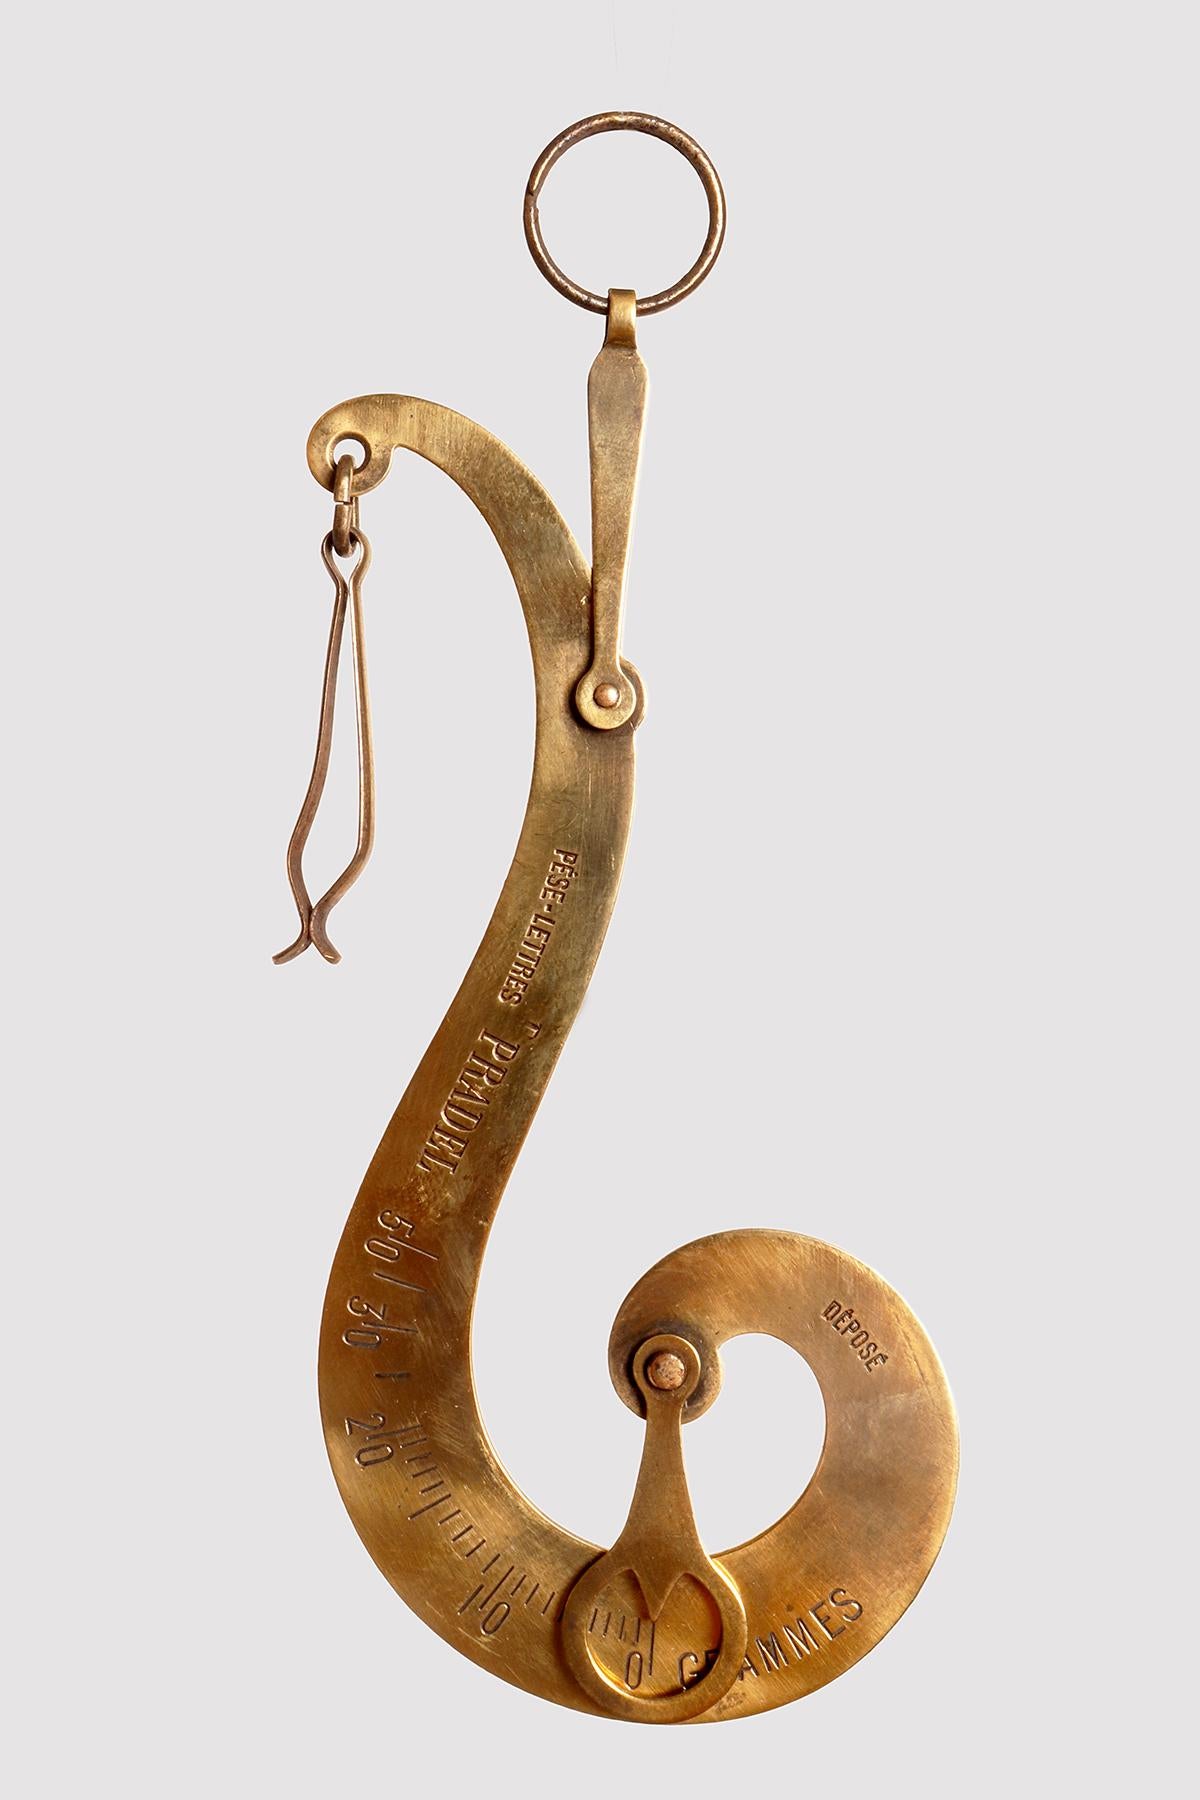 A scale weighs travel letters of gilt brass, S-shaped round plate of gilt brass. Ring to hold it between the fingers of one hand and pliers to insert the travel letters to be weighed. Pradel, France circa 1880.